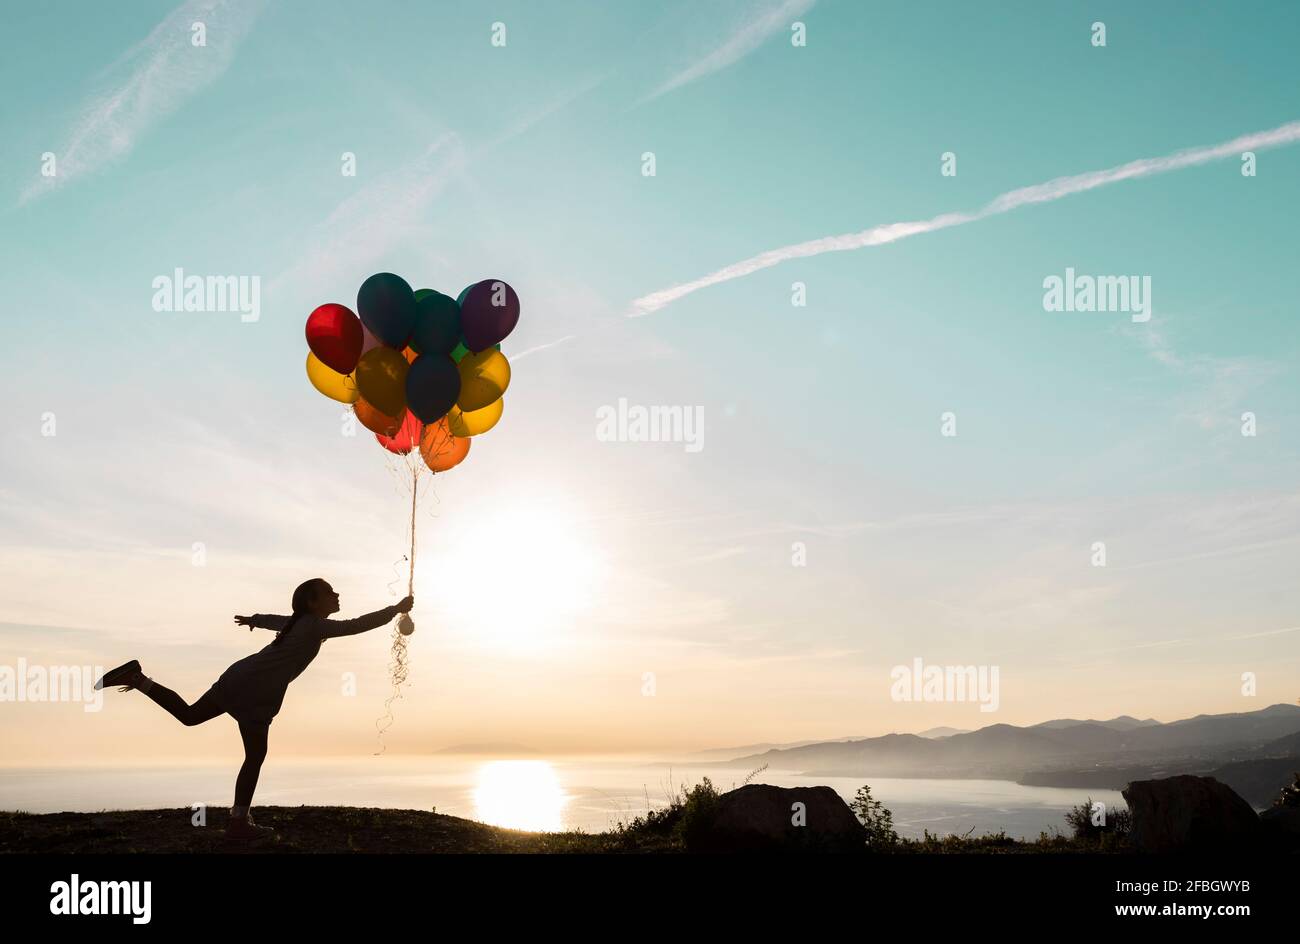 Girl in silhouette playing with balloons during sunset Stock Photo